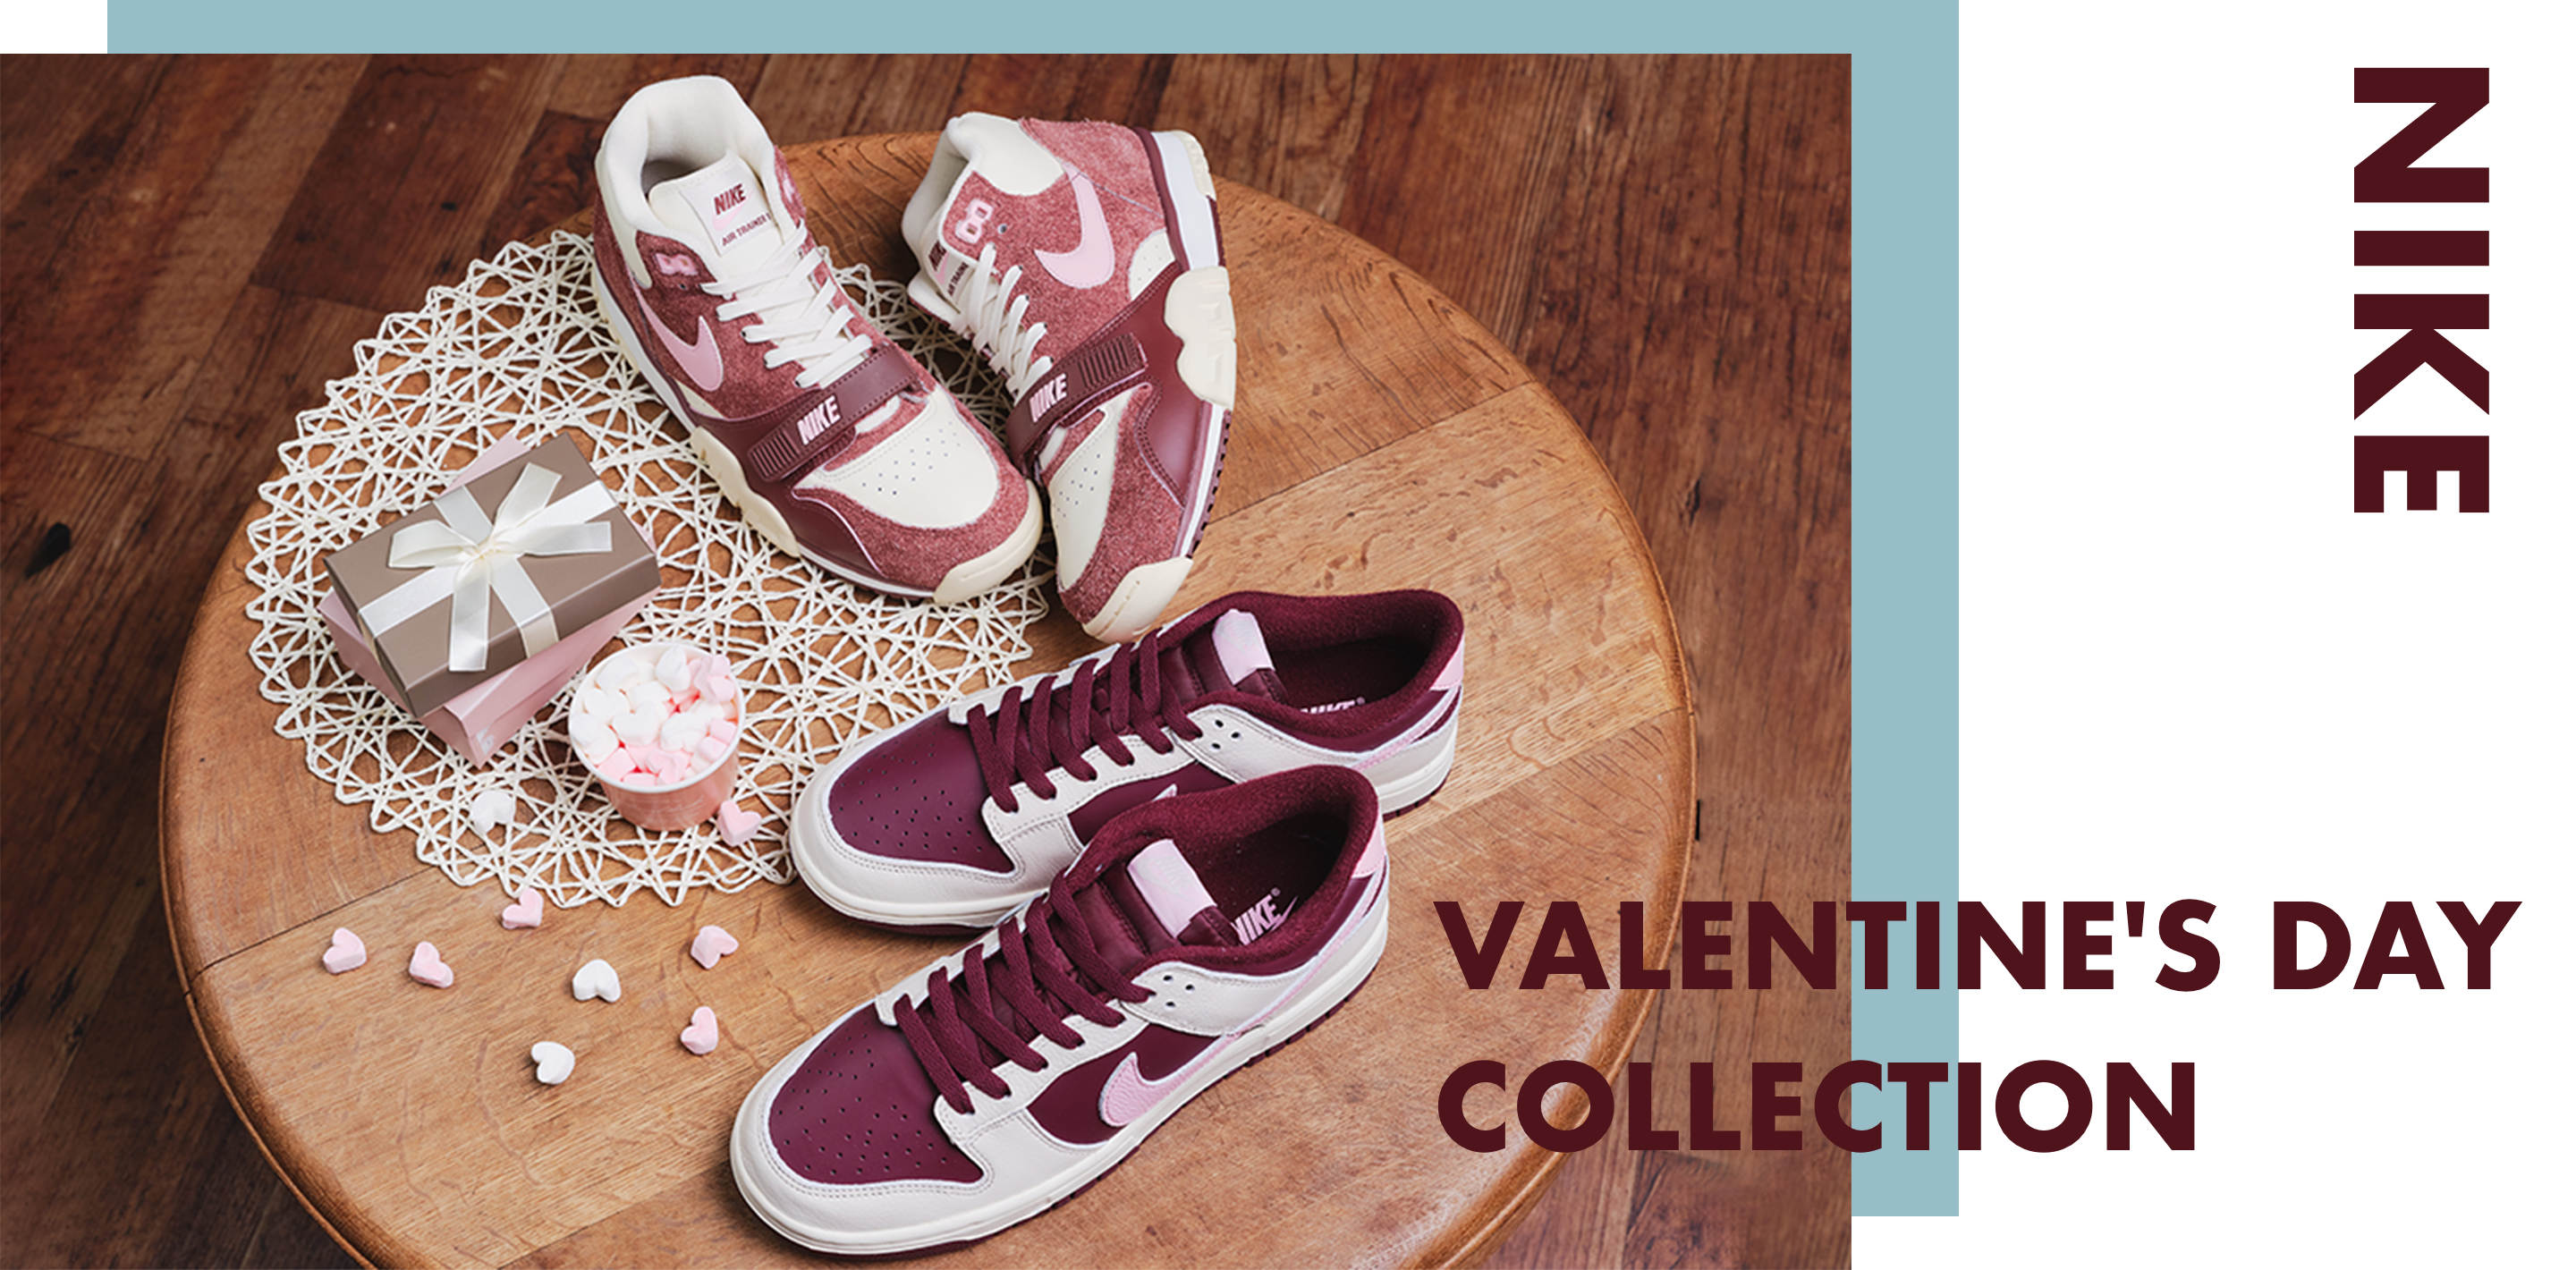 NIKE VALENTINE'S DAY COLLECTION